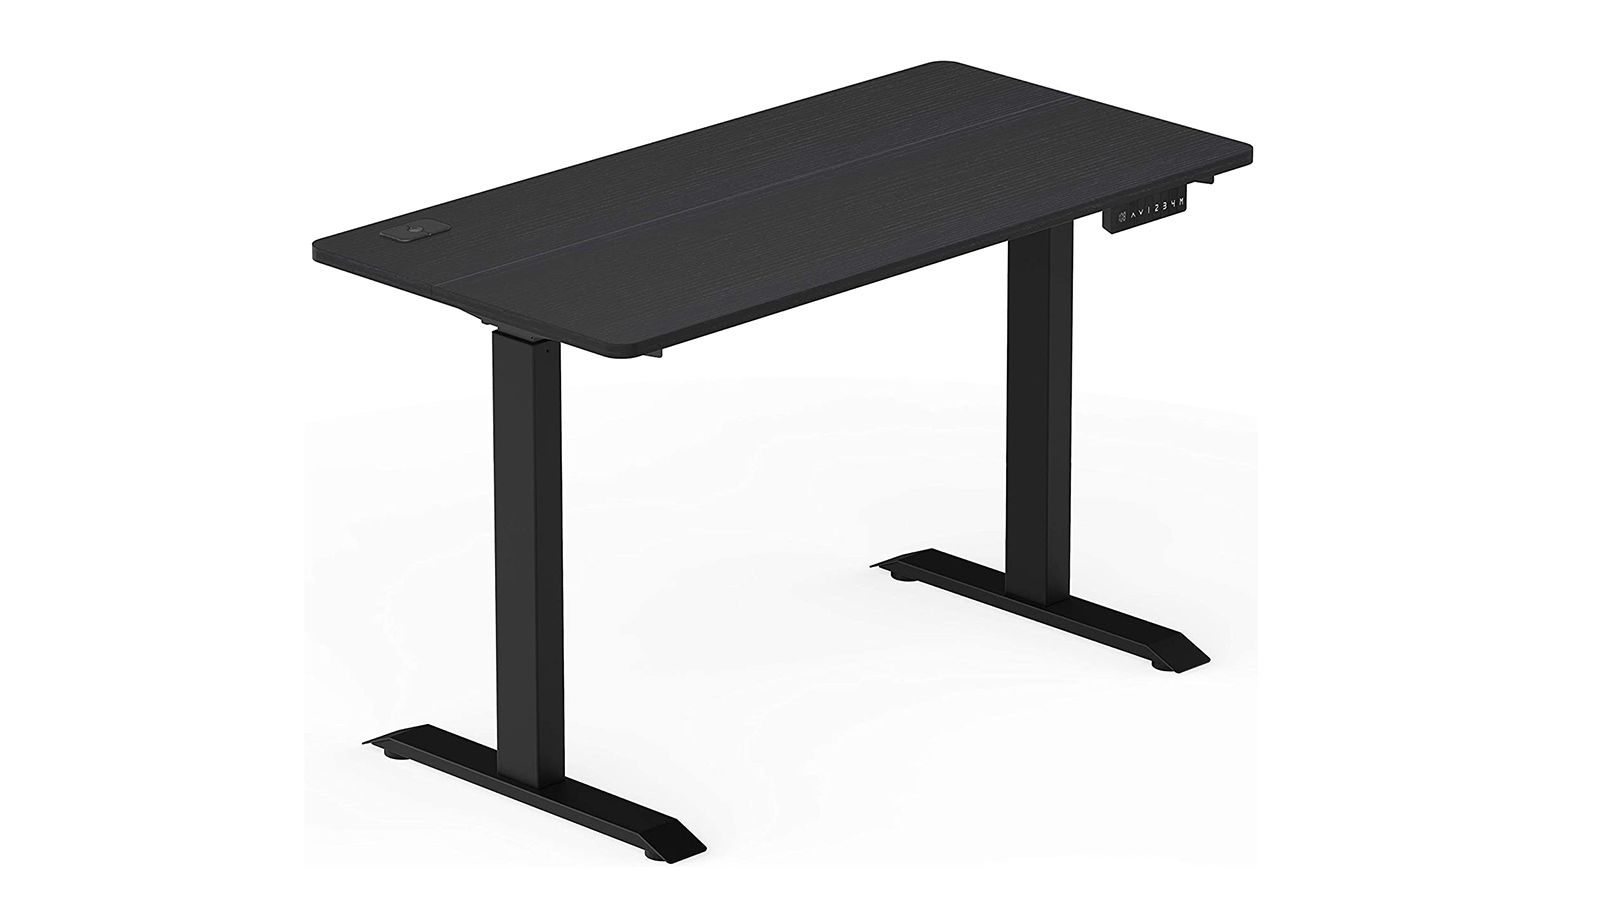 stand out Certificate Get up SHW Electric Height-Adjustable Computer Desk review | CNN Underscored